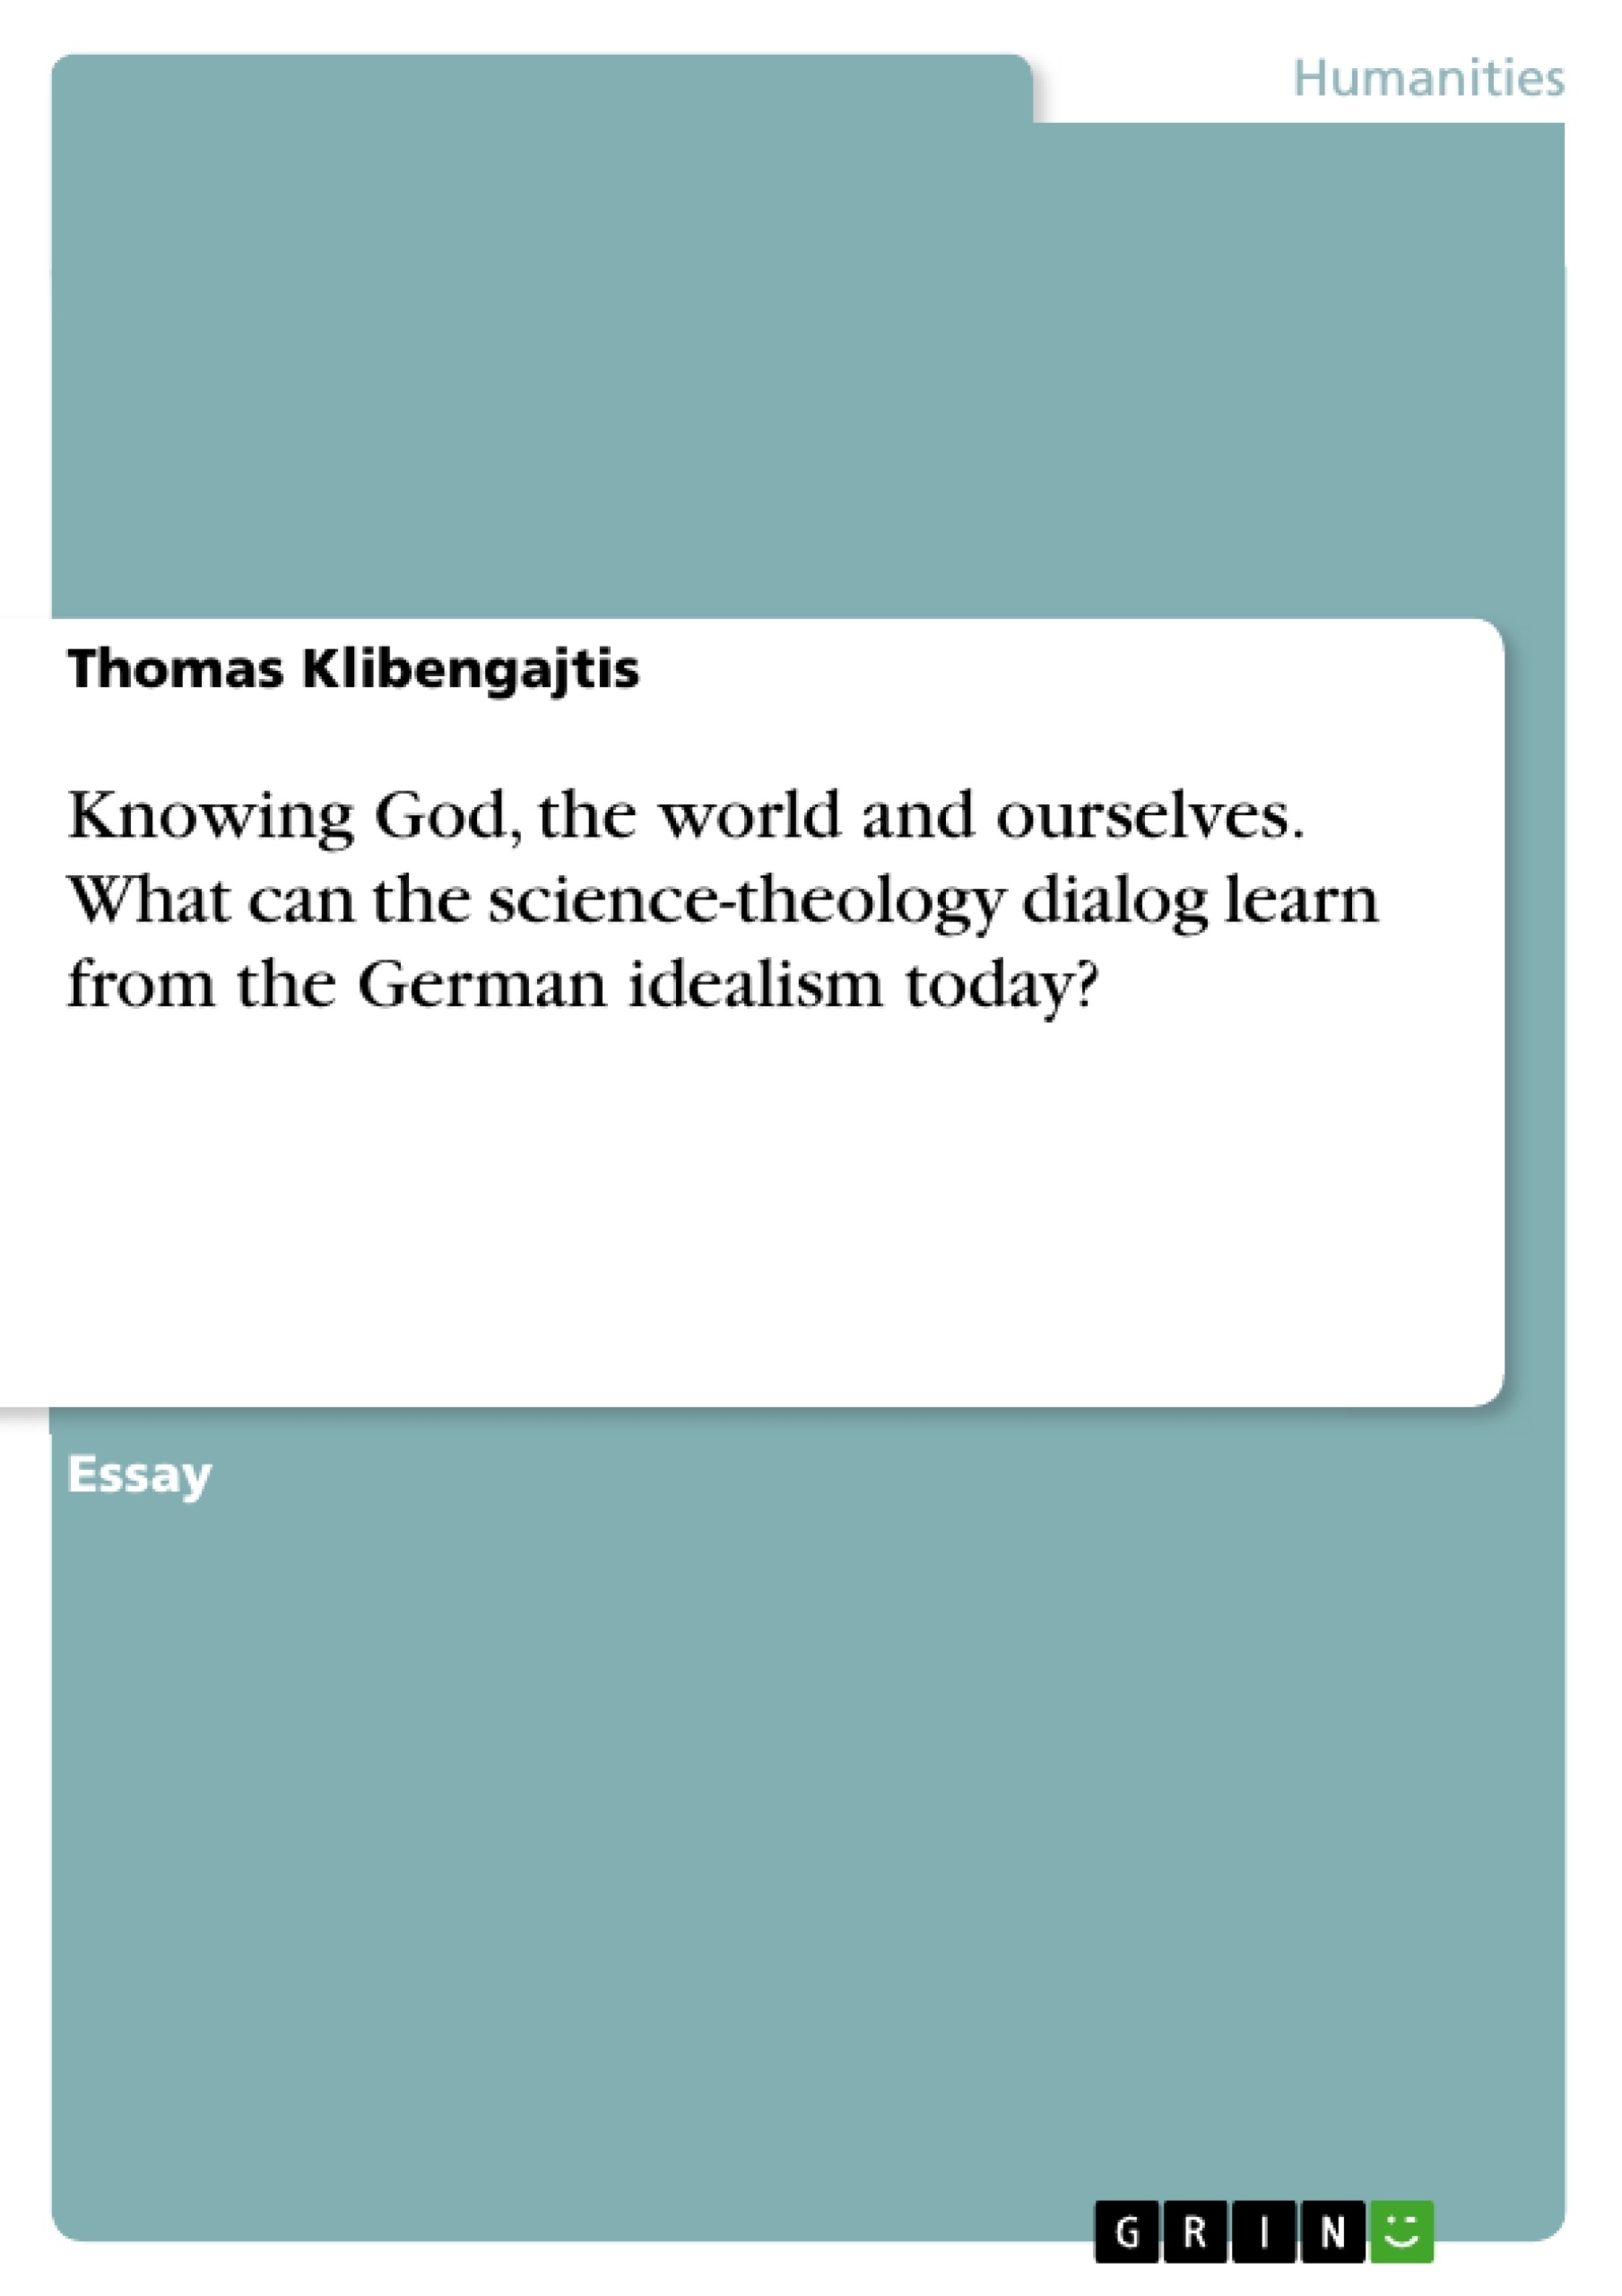 Titre: Knowing God, the world and ourselves. What can the science-theology dialog learn from the German idealism today?